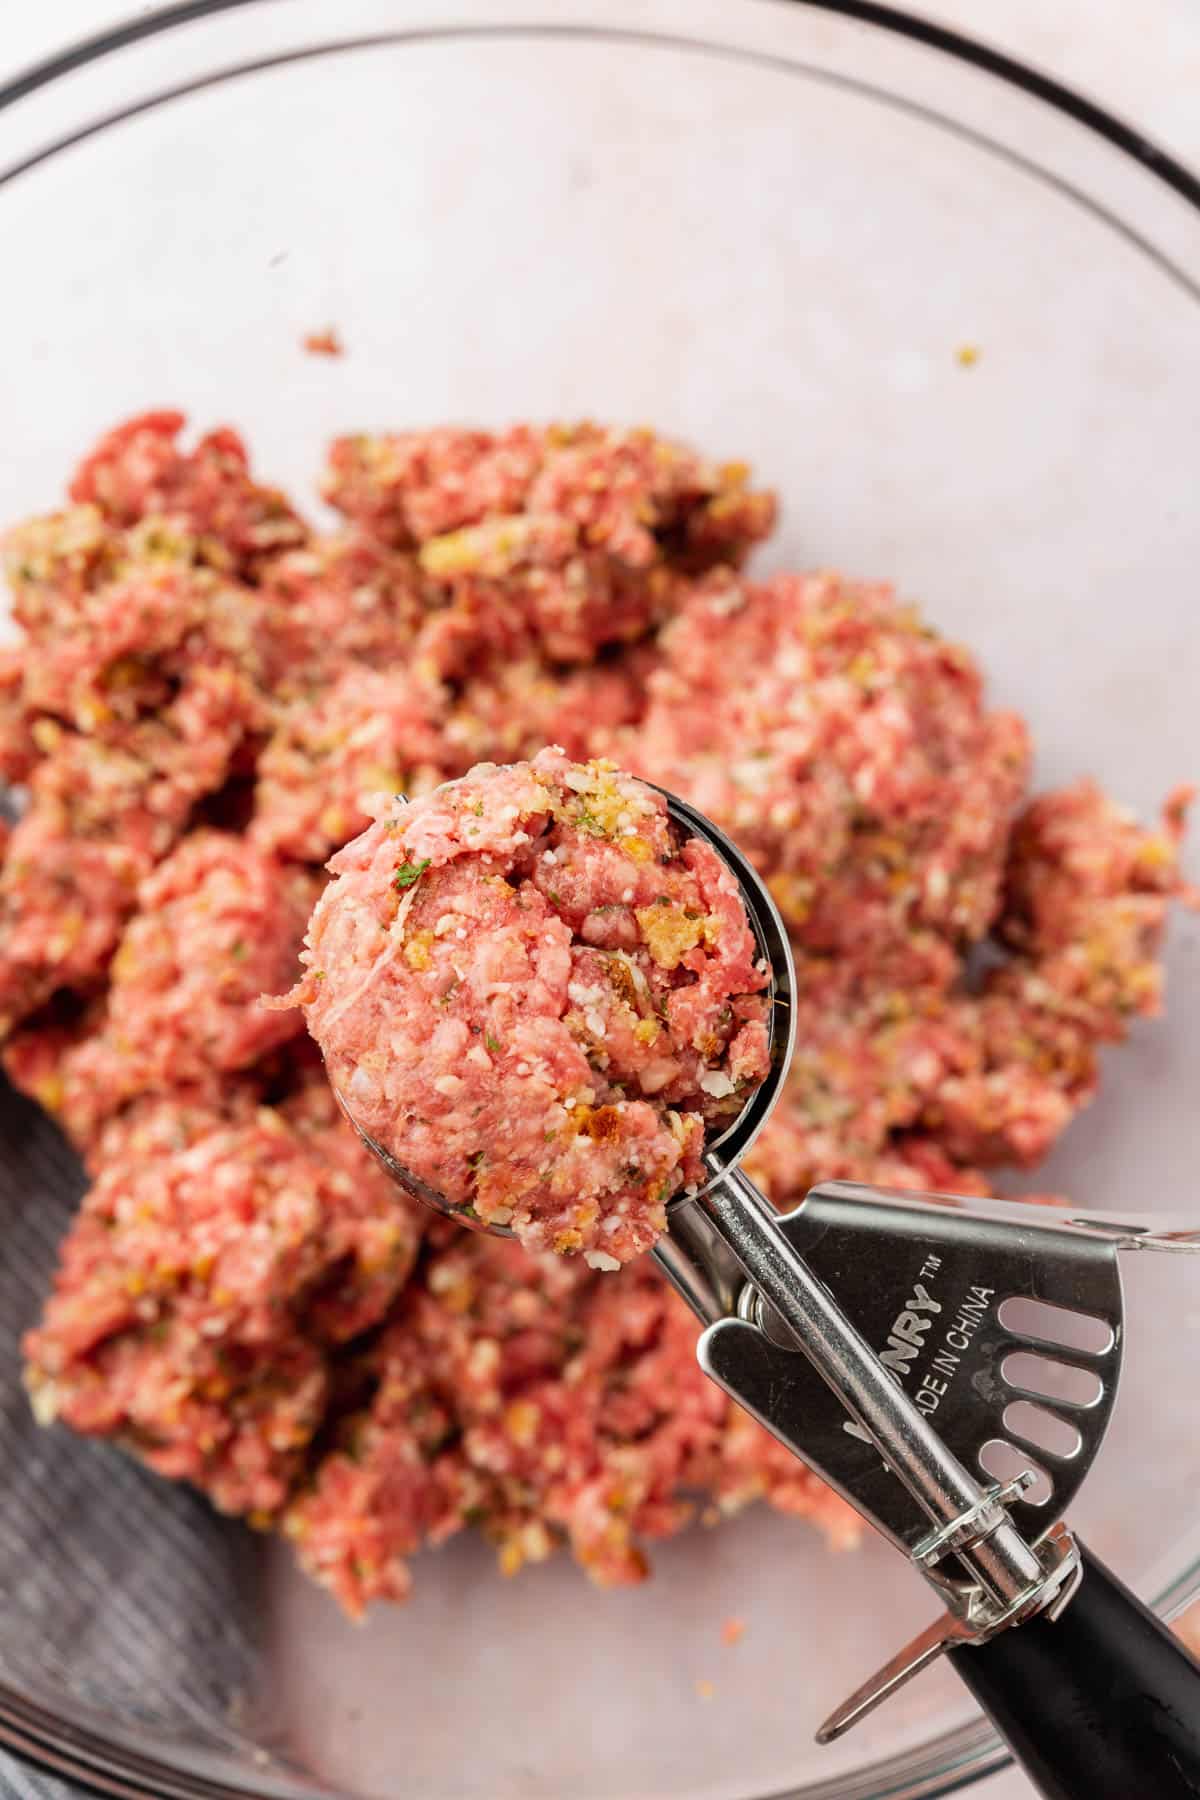 A ice cream scoop with raw gluten-free meatball mixture over a bowl of more meat.